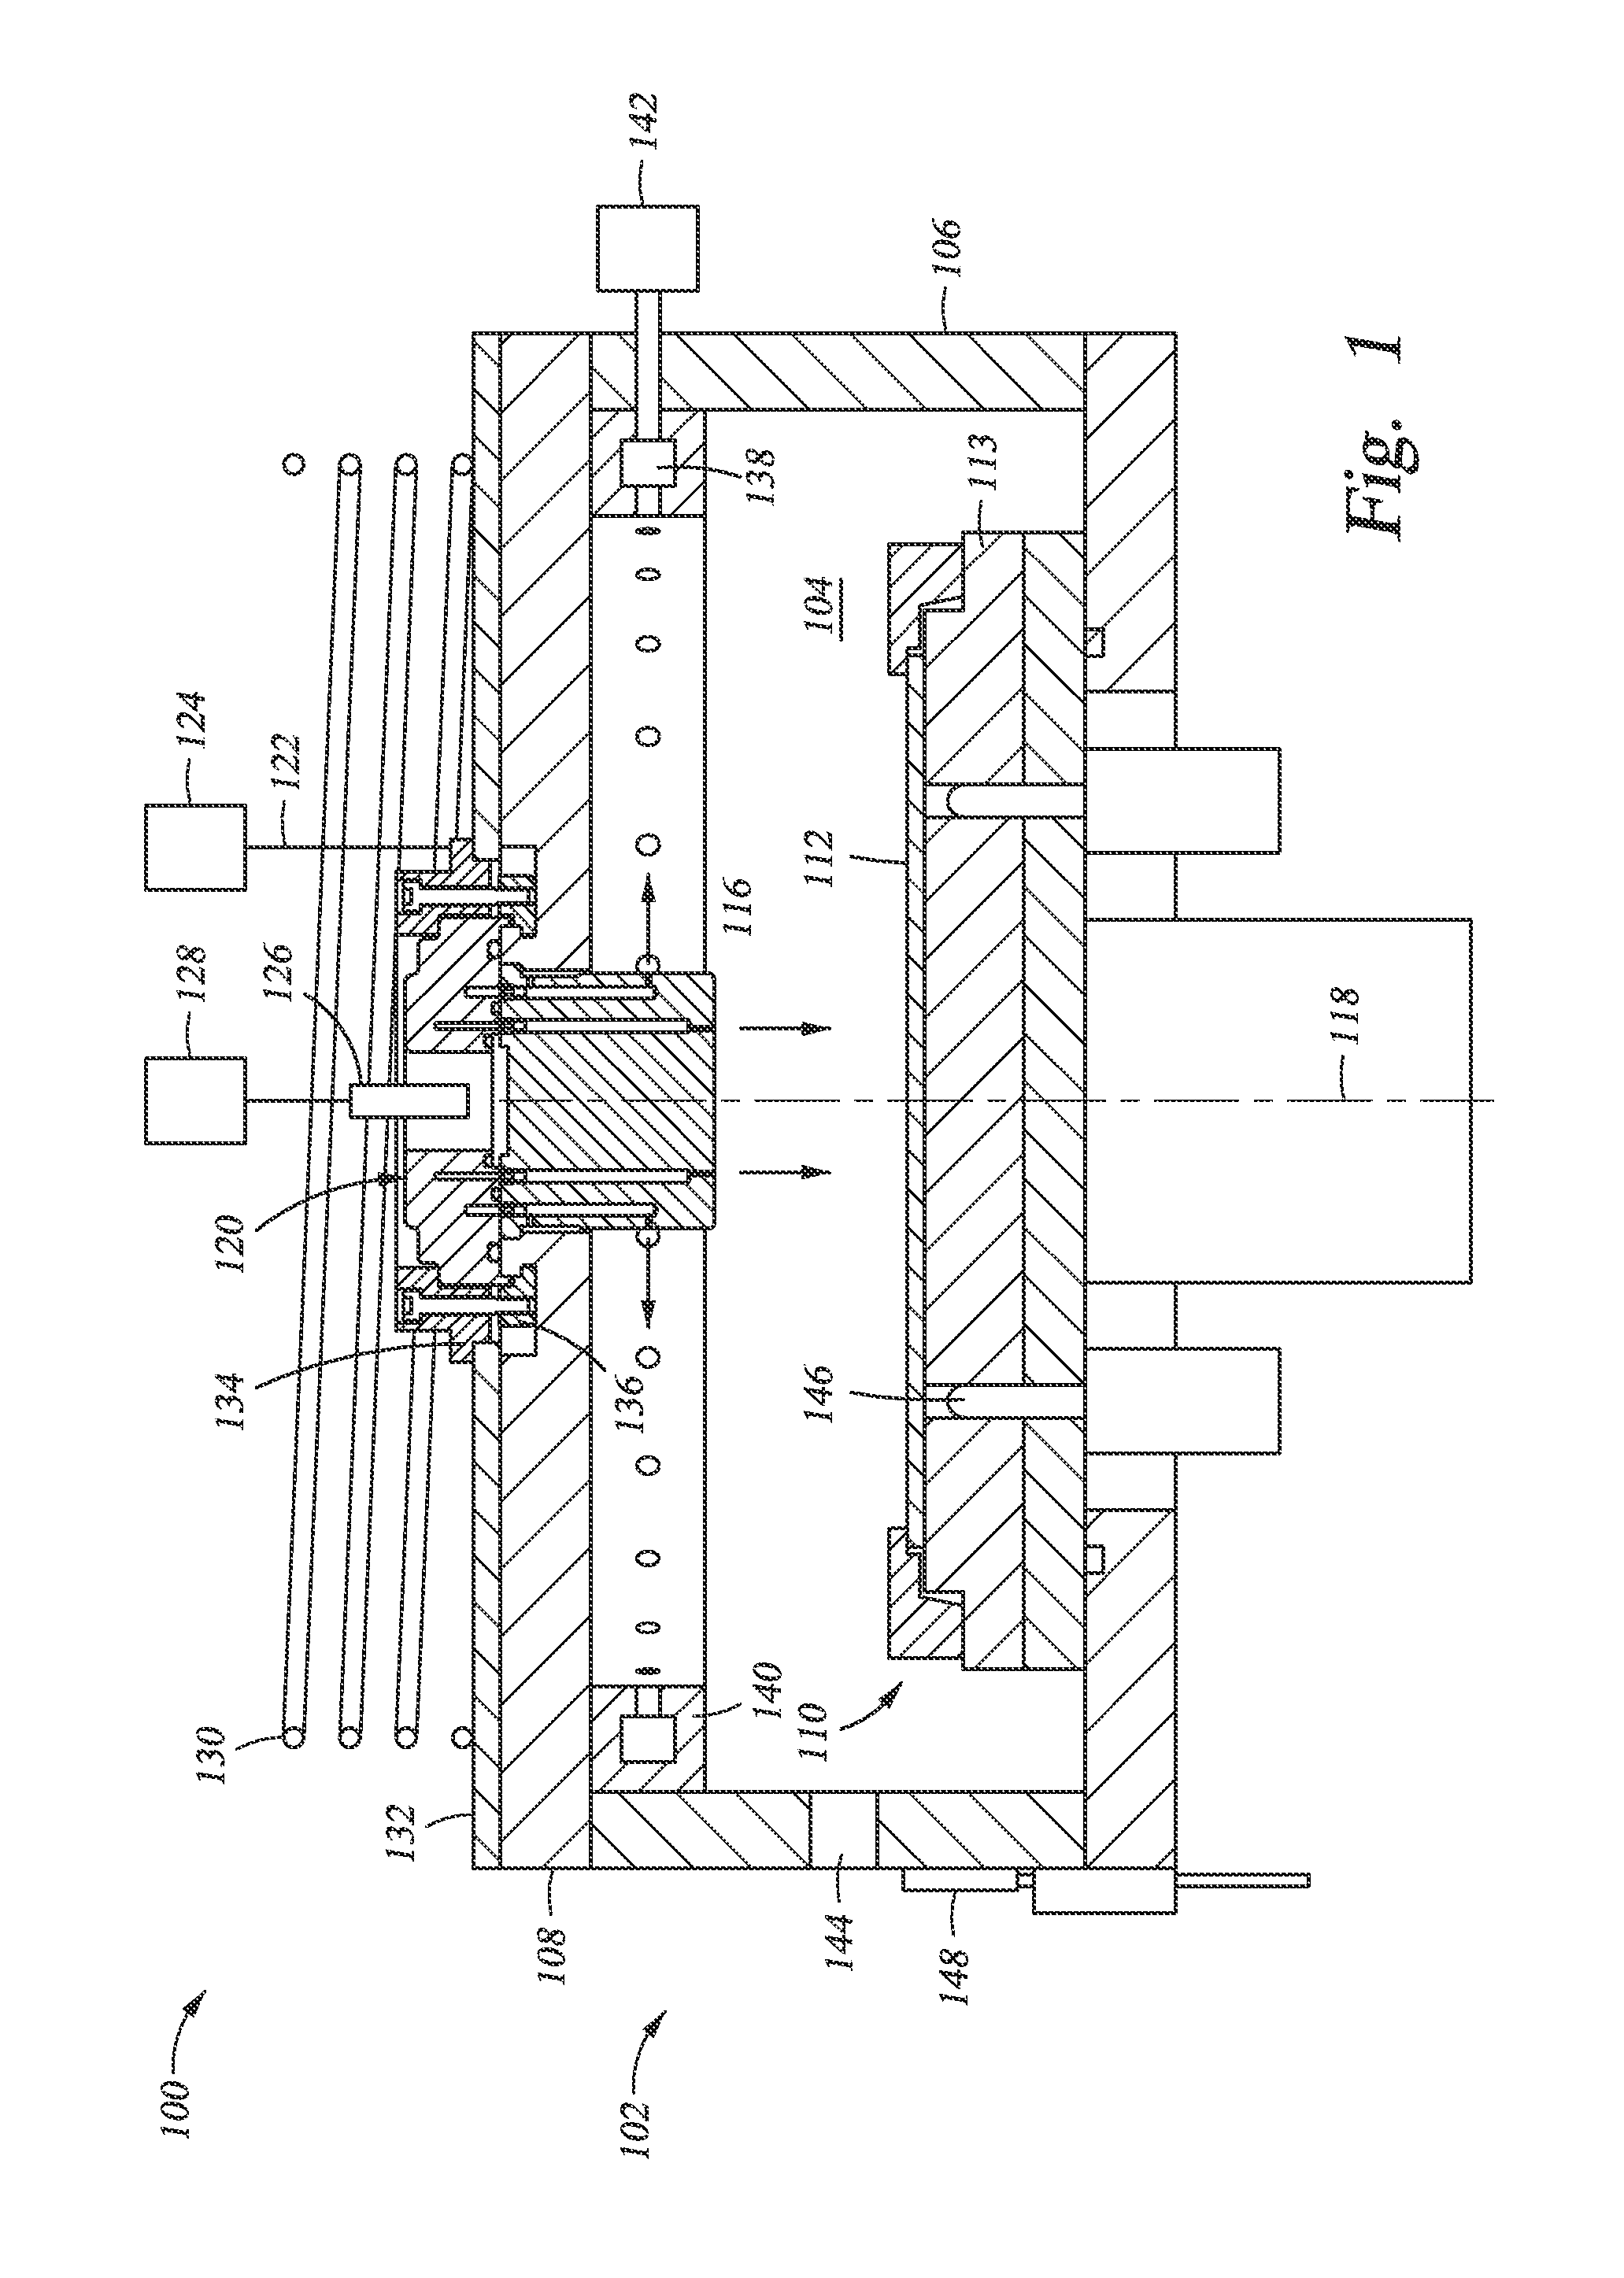 Tunable gas delivery assembly with internal diffuser and angular injection